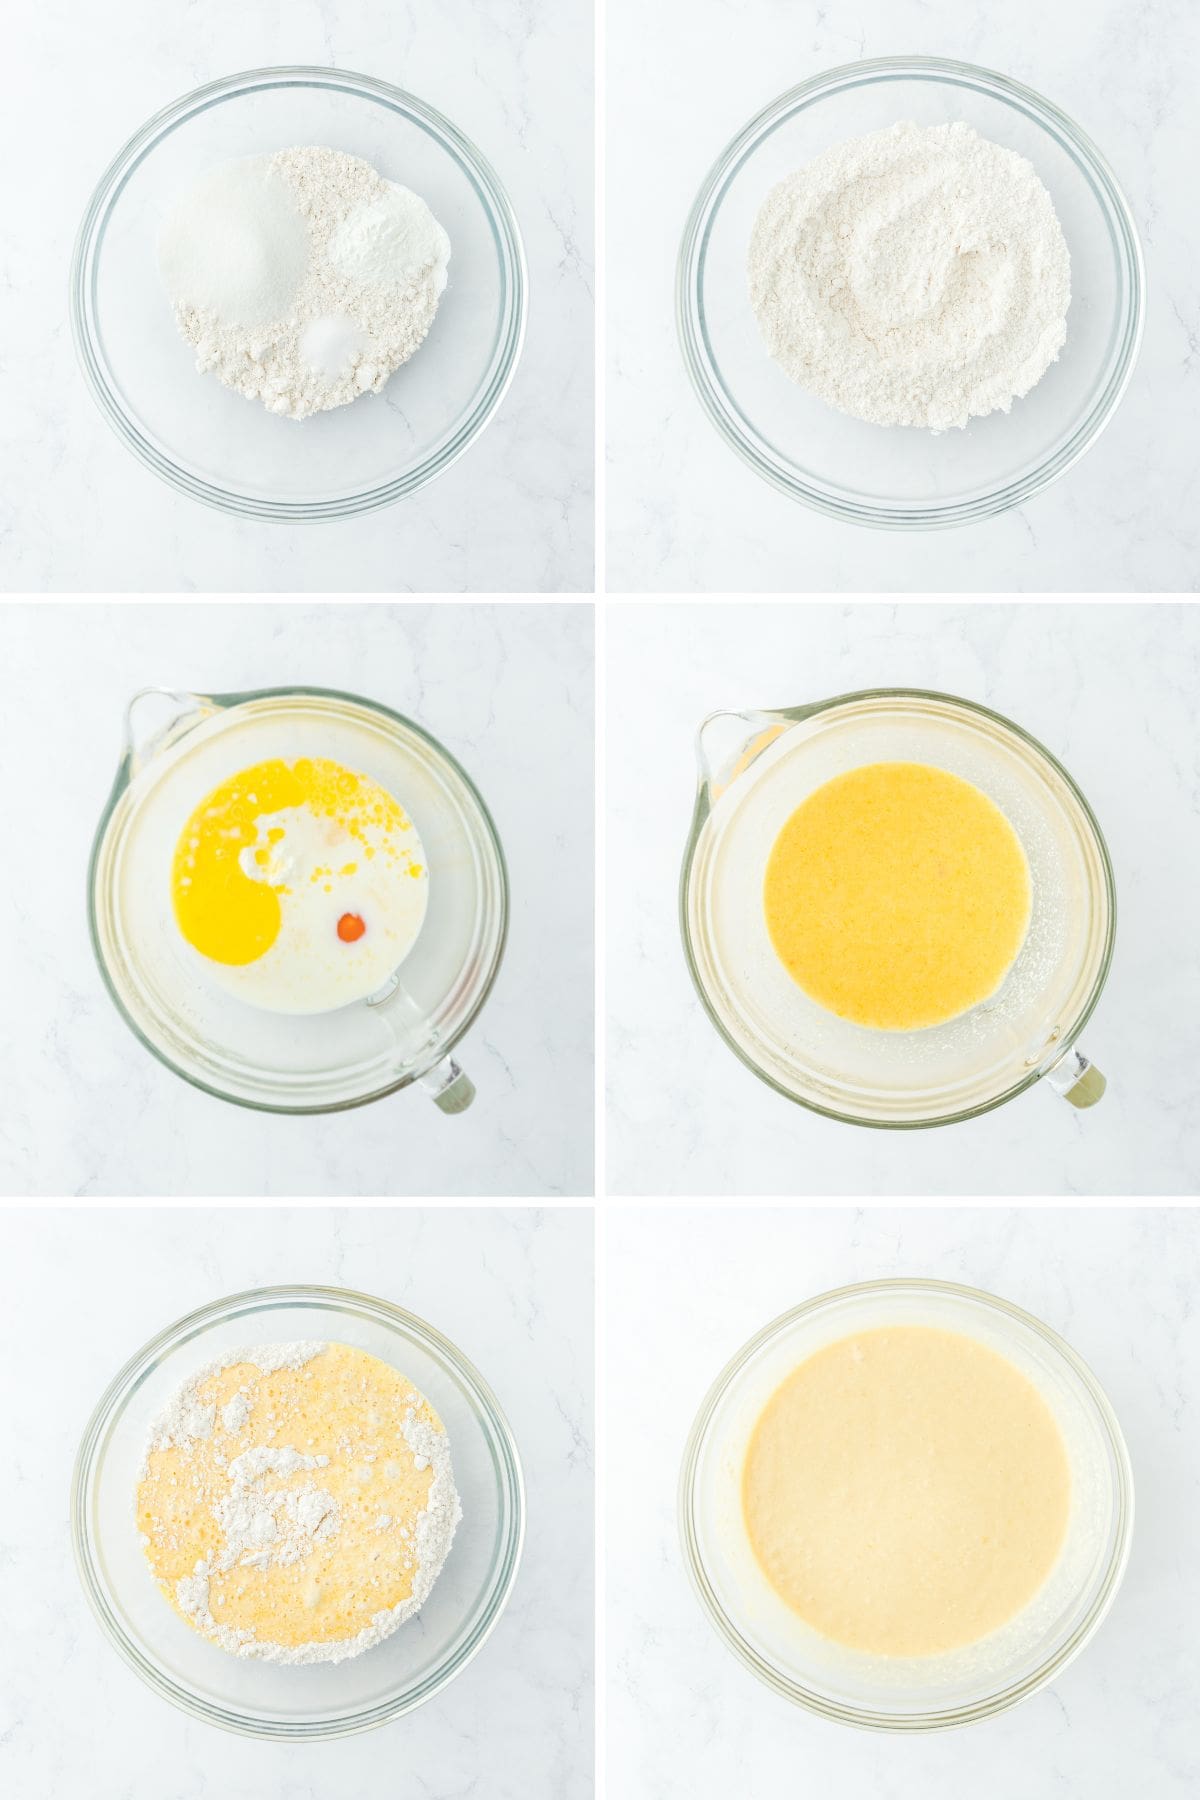 A collage showing the steps for mixing the pancake batter.